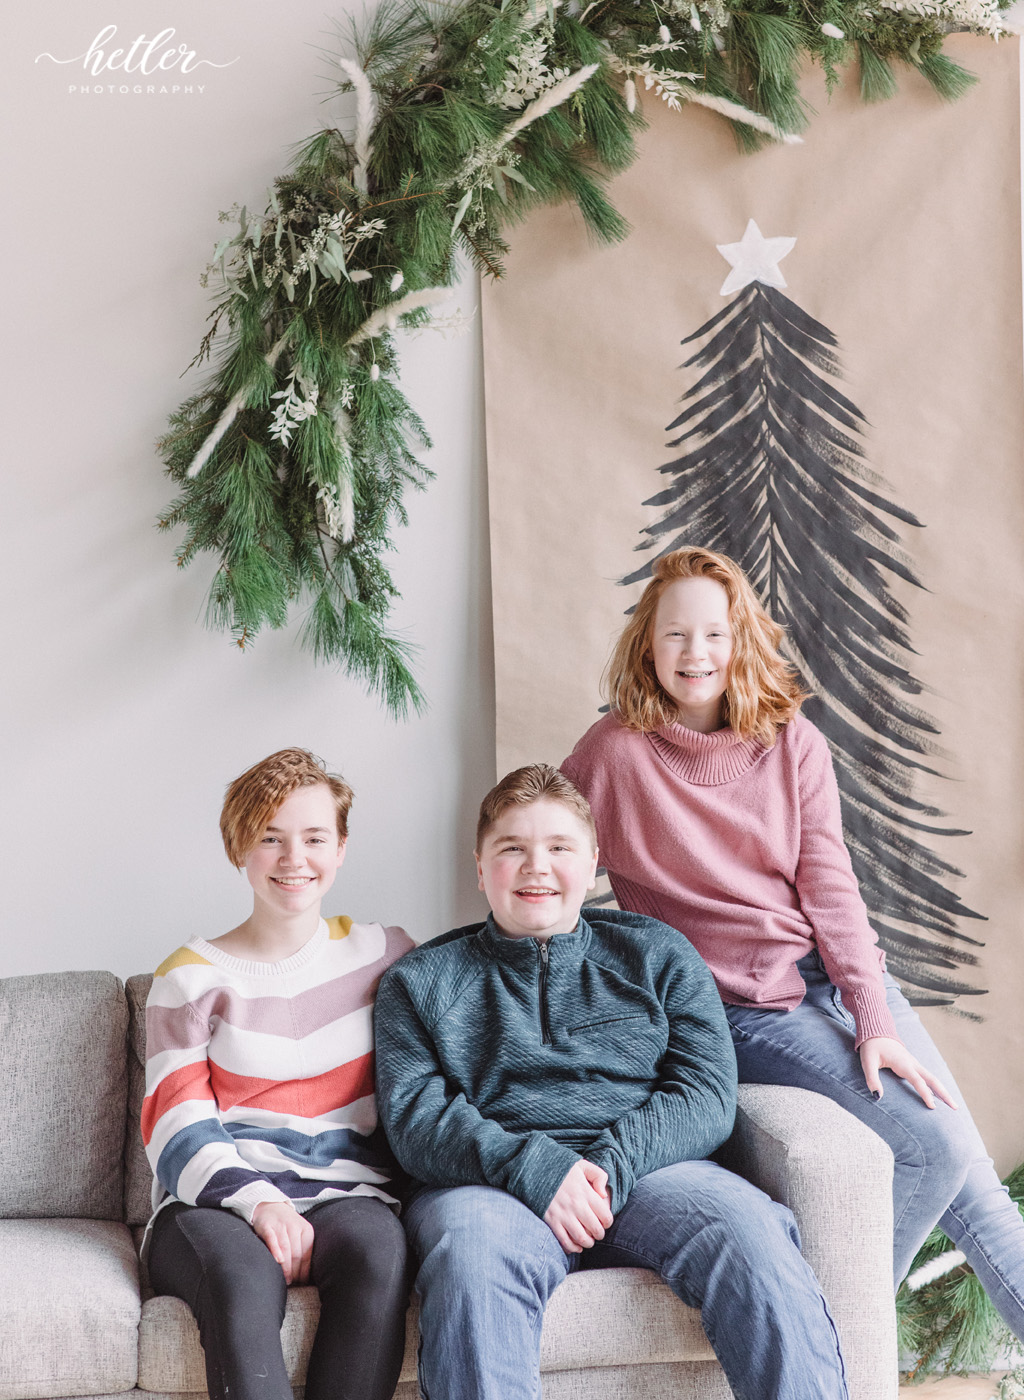 Grand Rapids Christmas studio mini session with simple light and airy style